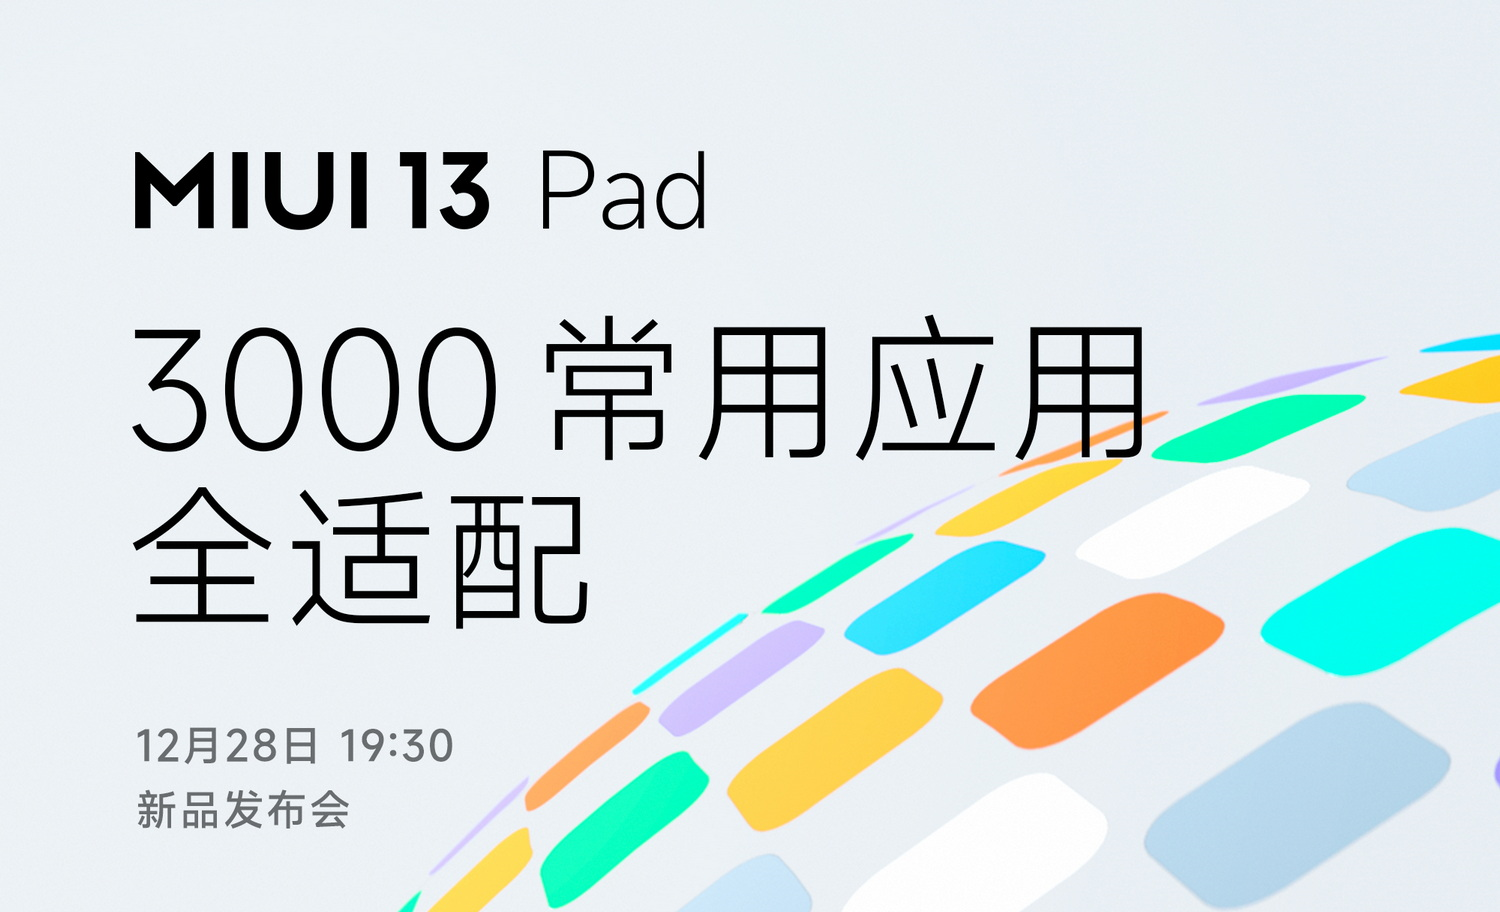 Xiaomi will present a special version of MIUI 13 for tablets